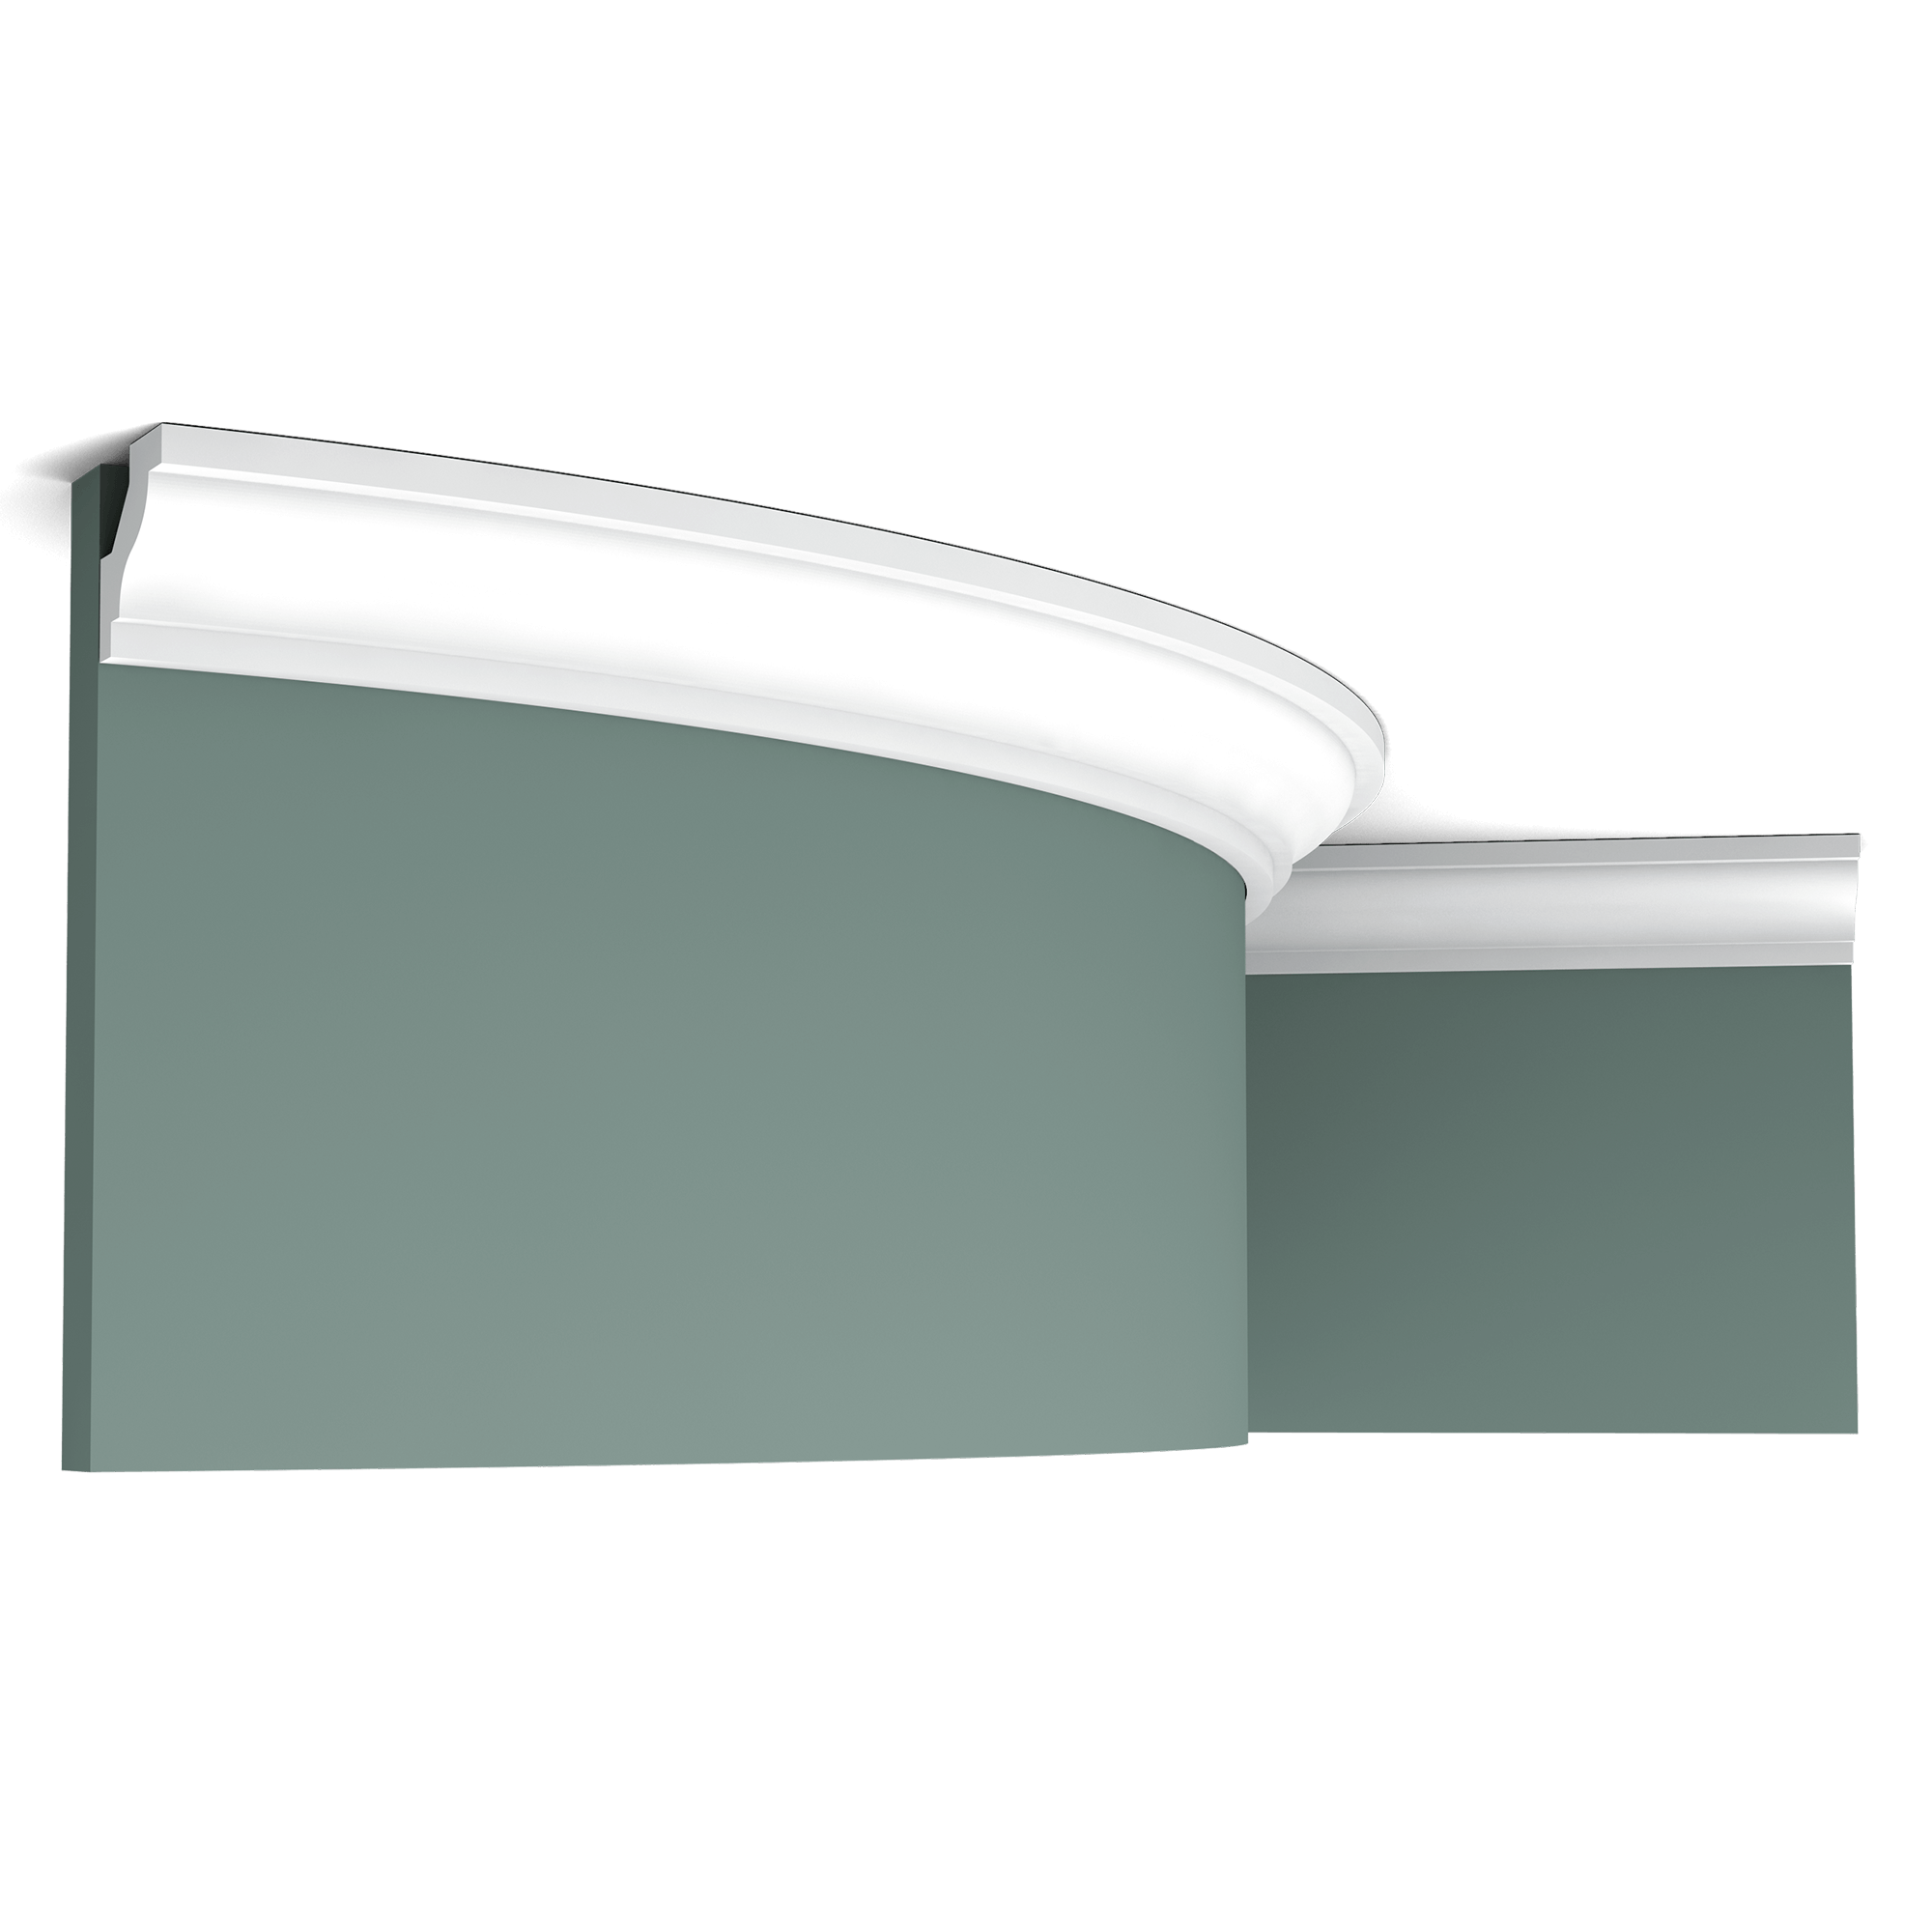 c230f cornice moulding 3c4a Flexible version of the C230. Narrow cornice moulding with a classic linear design. Thanks to its Flex technology, curved walls and surfaces are no problem. Installation remark: It is necessary to screw this profile on the wall. Flex Radius: R min = 150 cm